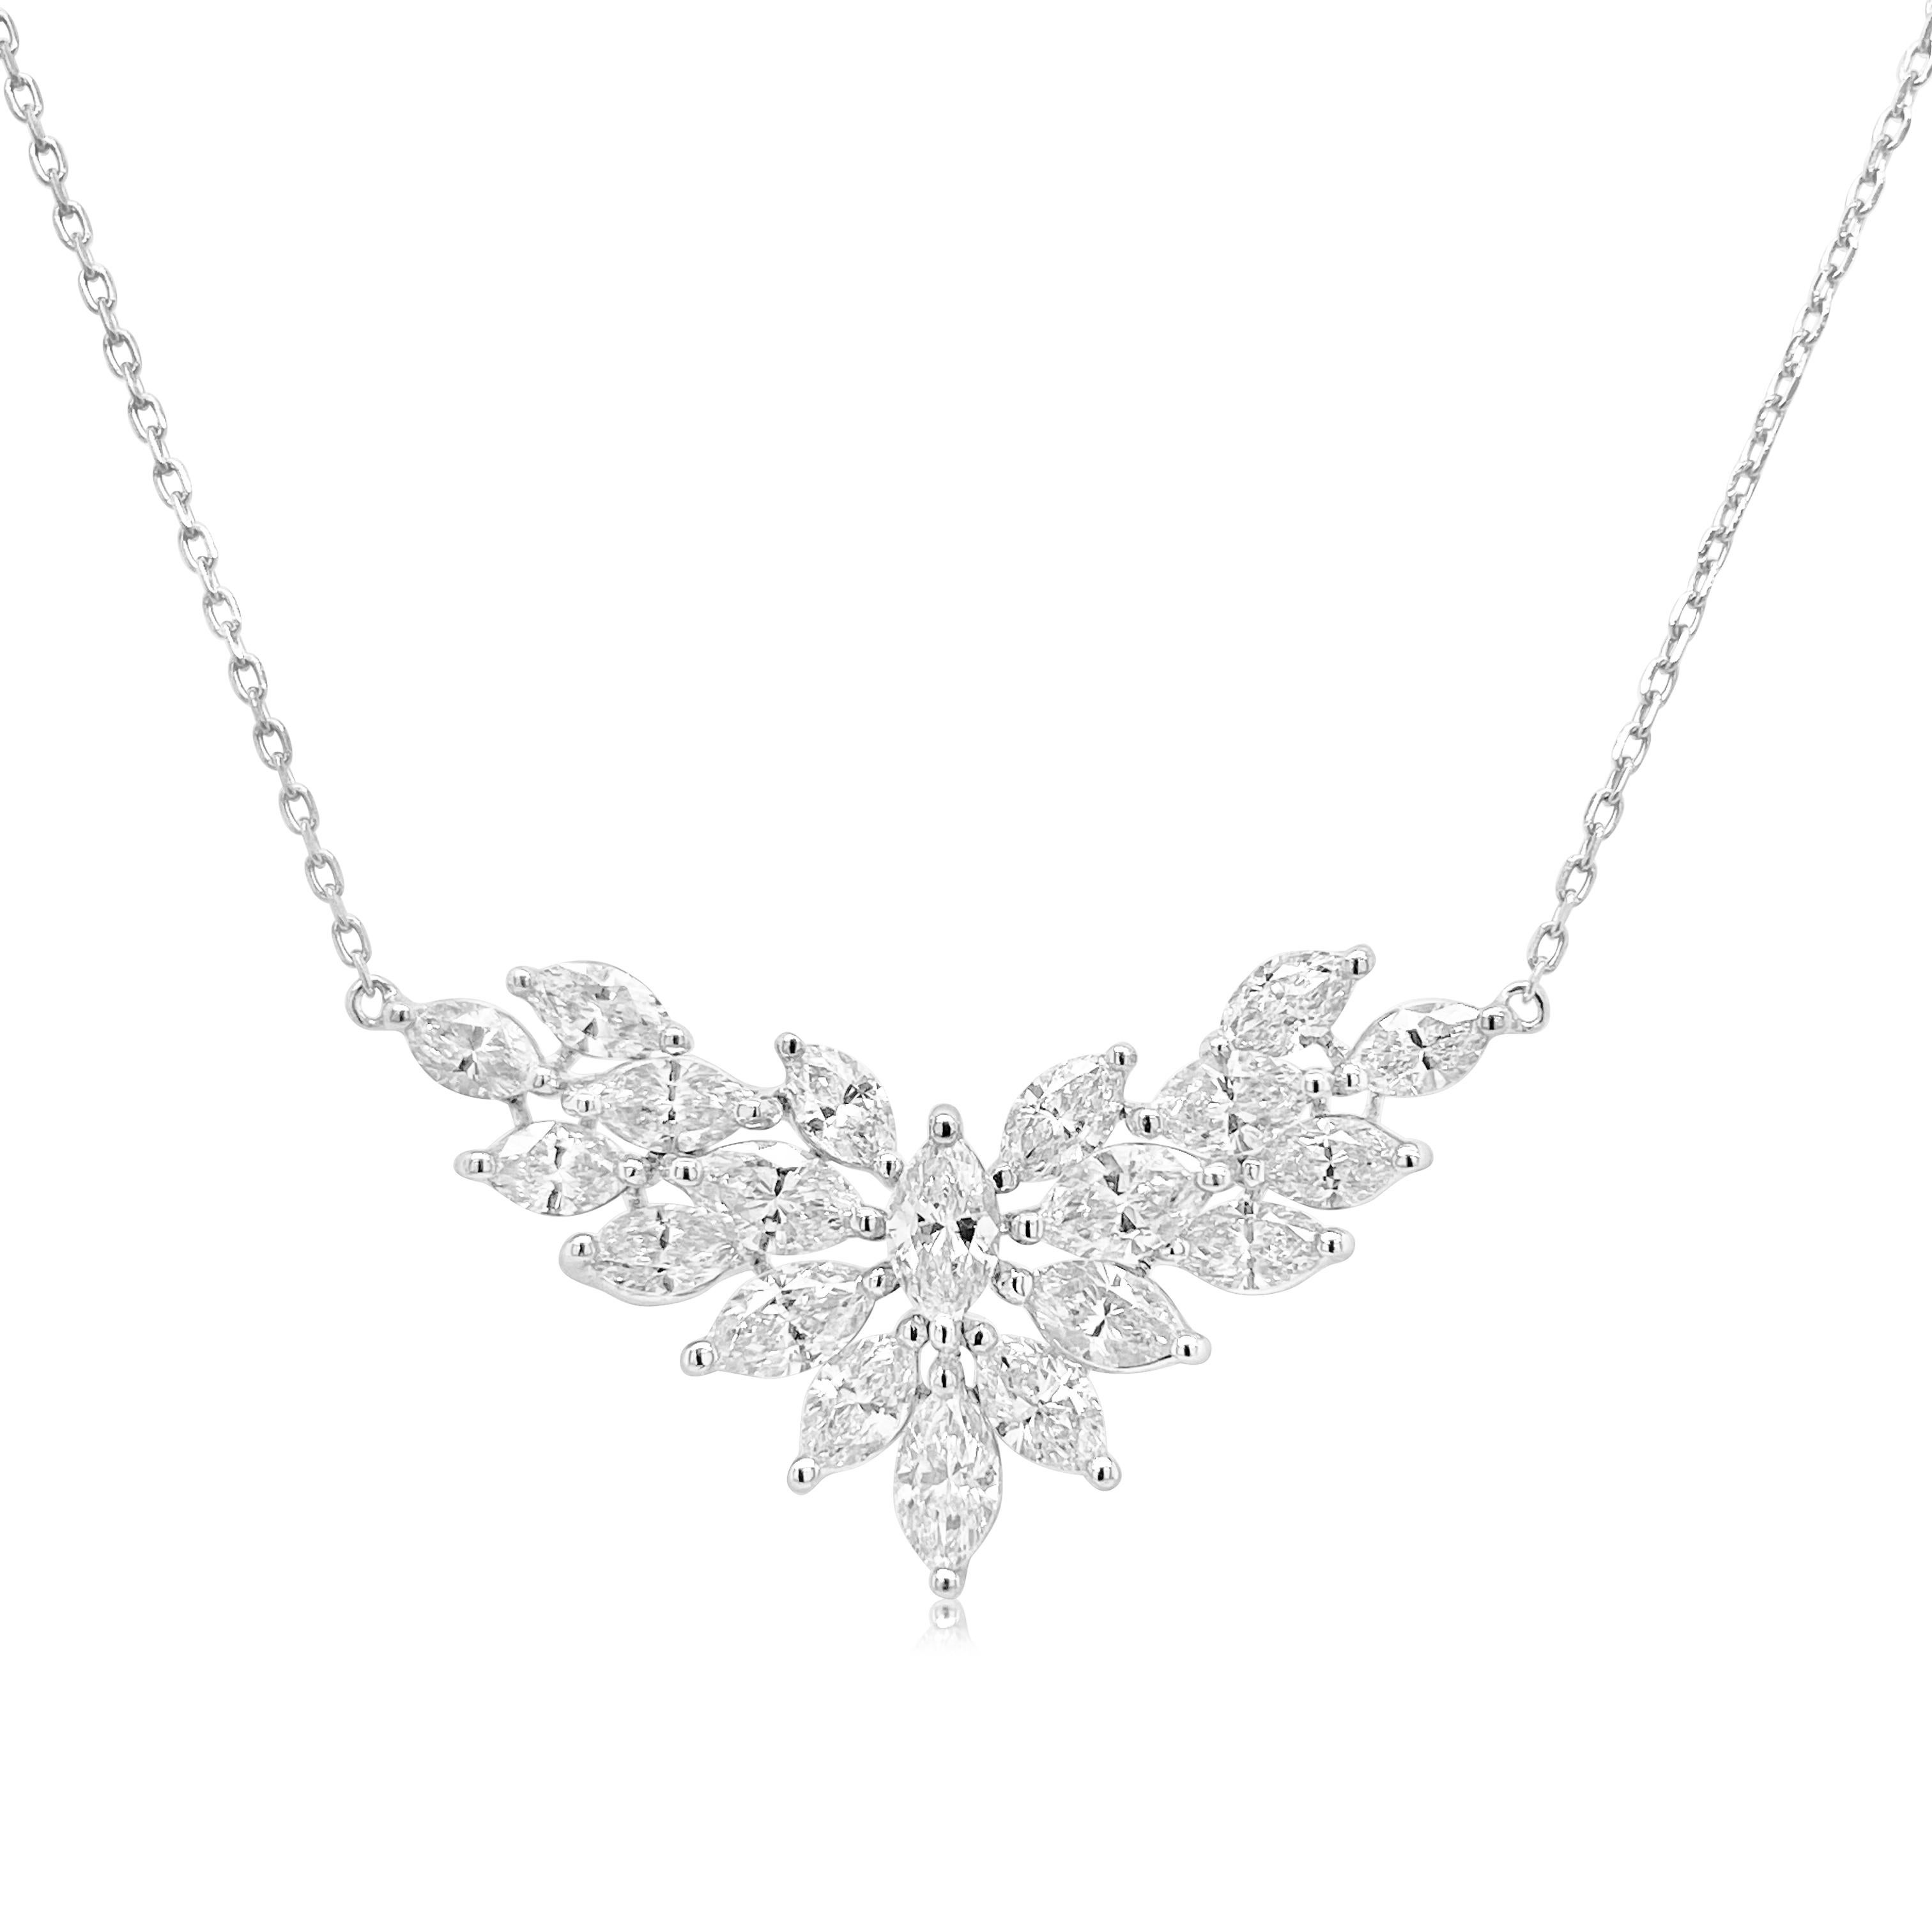 This charming pendant necklace is adorned with Marquise diamonds arranged in a beautiful setting, perfect for an evening outing.

-	Made in Platinum
-	Marquise cut White Diamond - 2.480 carats

HYT Jewelry is a privately owned company headquartered